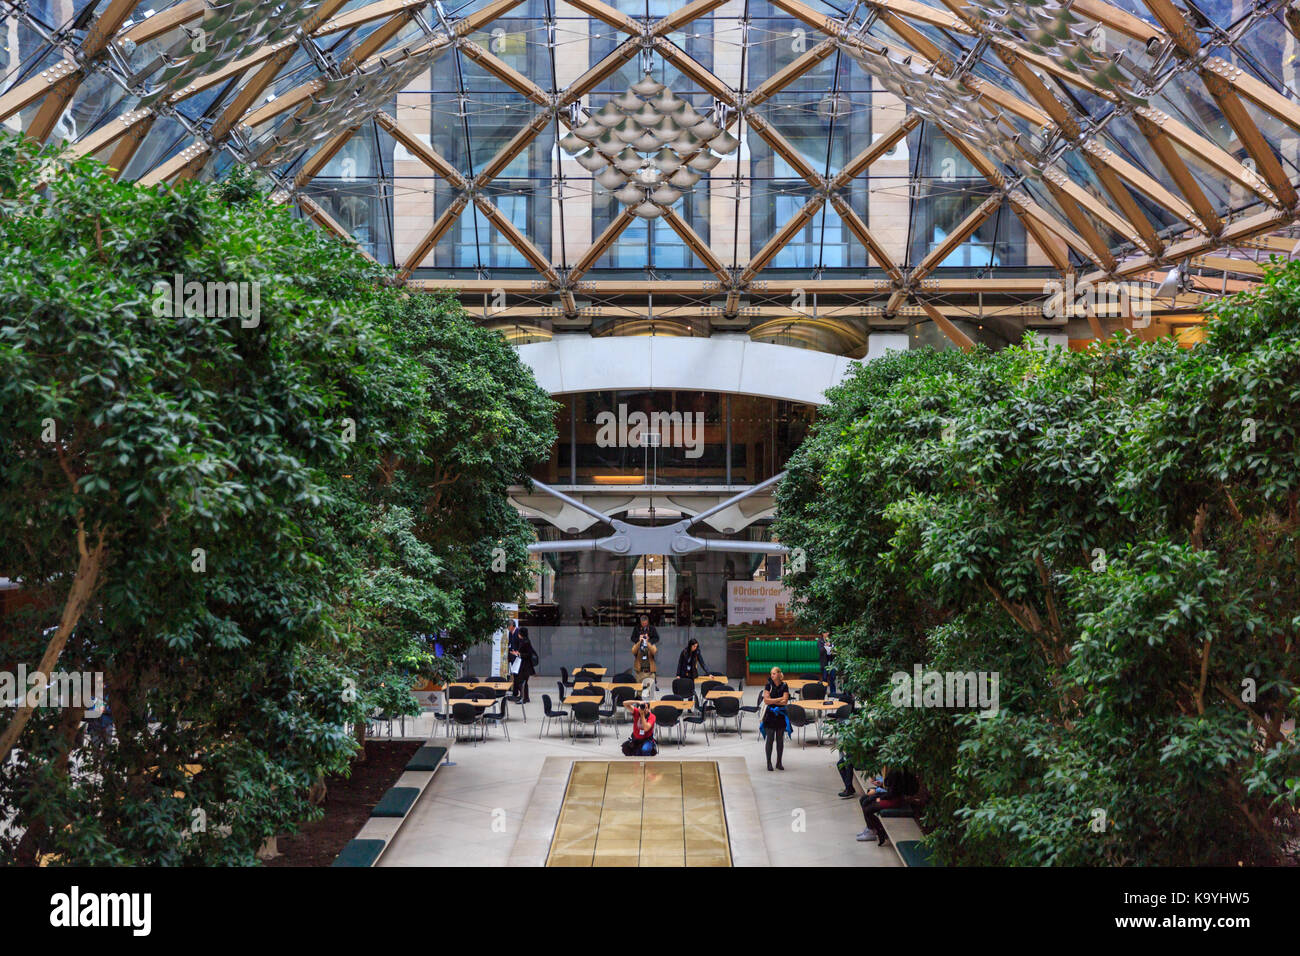 The glass roof structure and atrium at Portcullis House, Westminster, London England UK Stock Photo